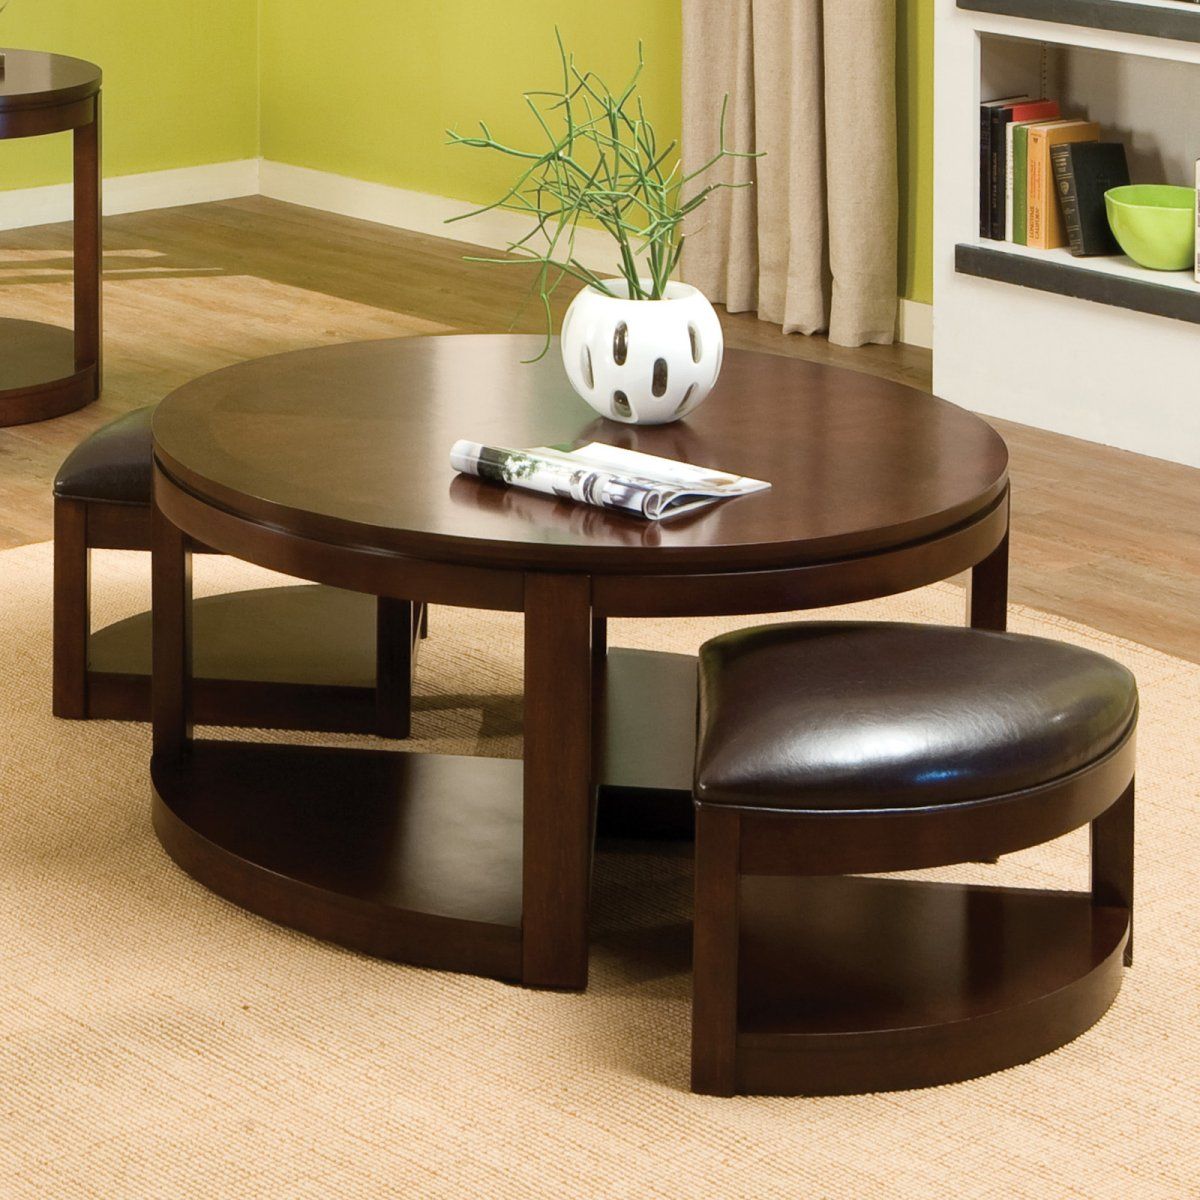 The Round Coffee Tables With Storage – The Simple And Compact Furniture With Regard To Round Coffee Tables With Storage (View 6 of 15)